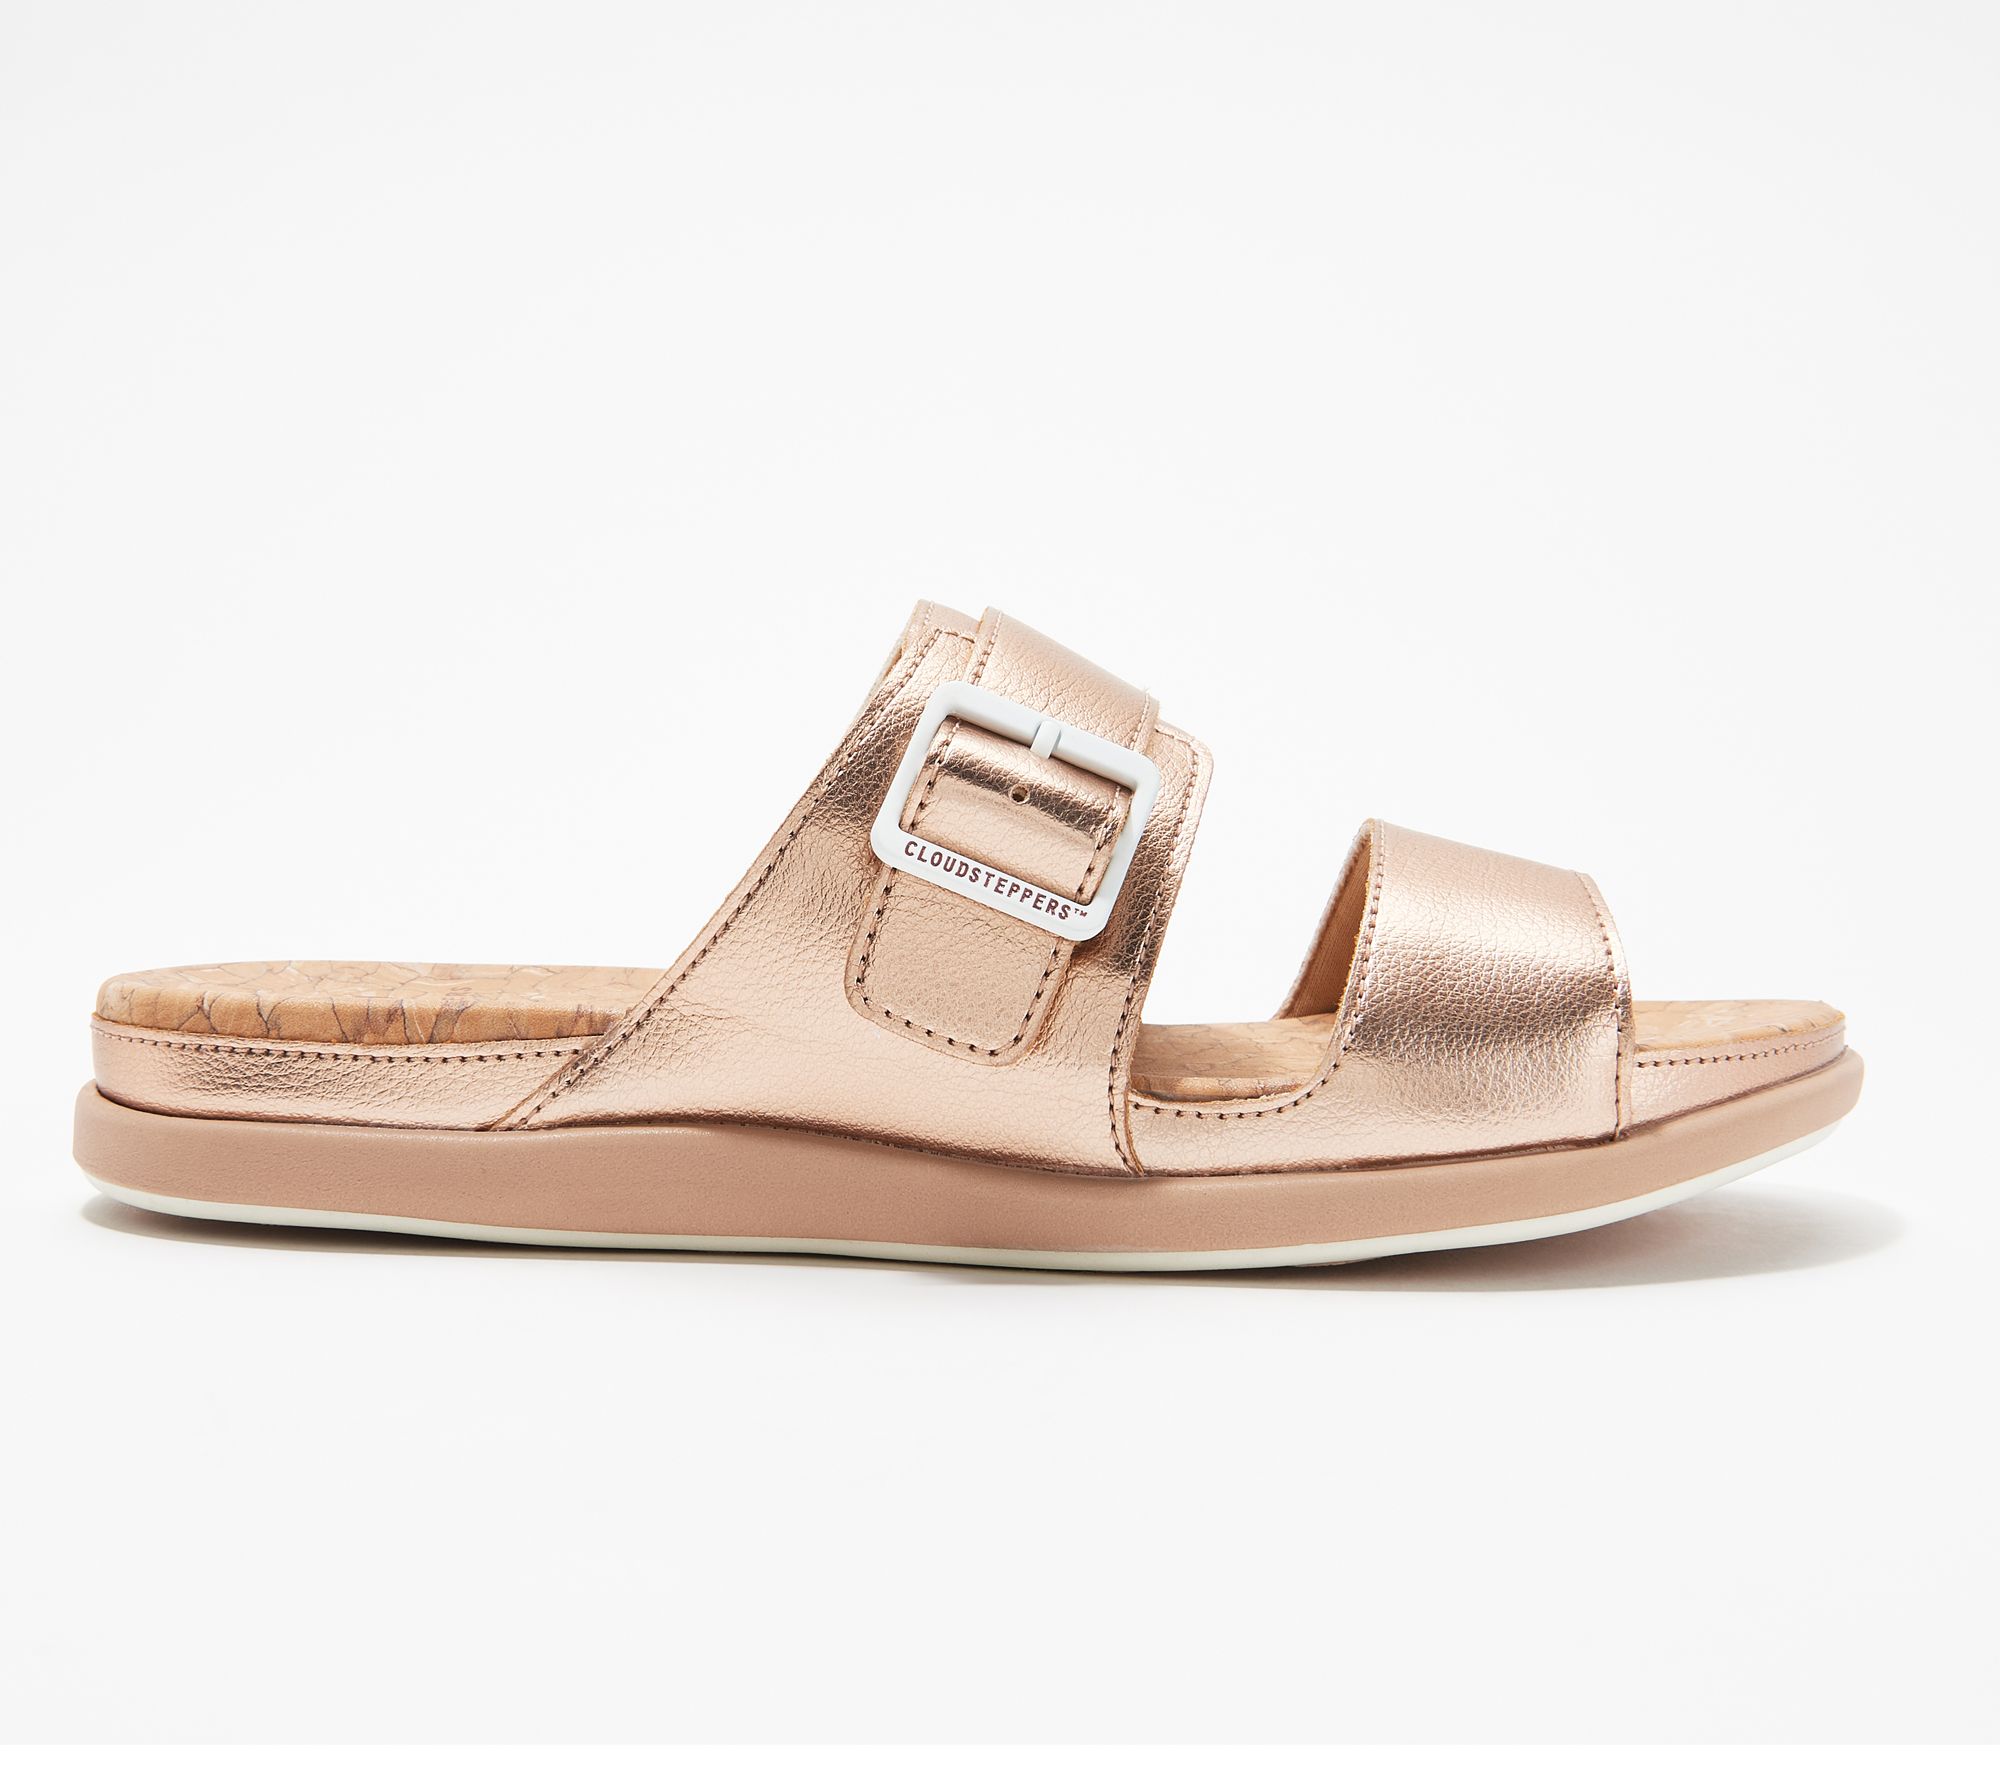 CLOUDSTEPPERS by Clarks Slip-On Sandals - Step June Tide - QVC.com